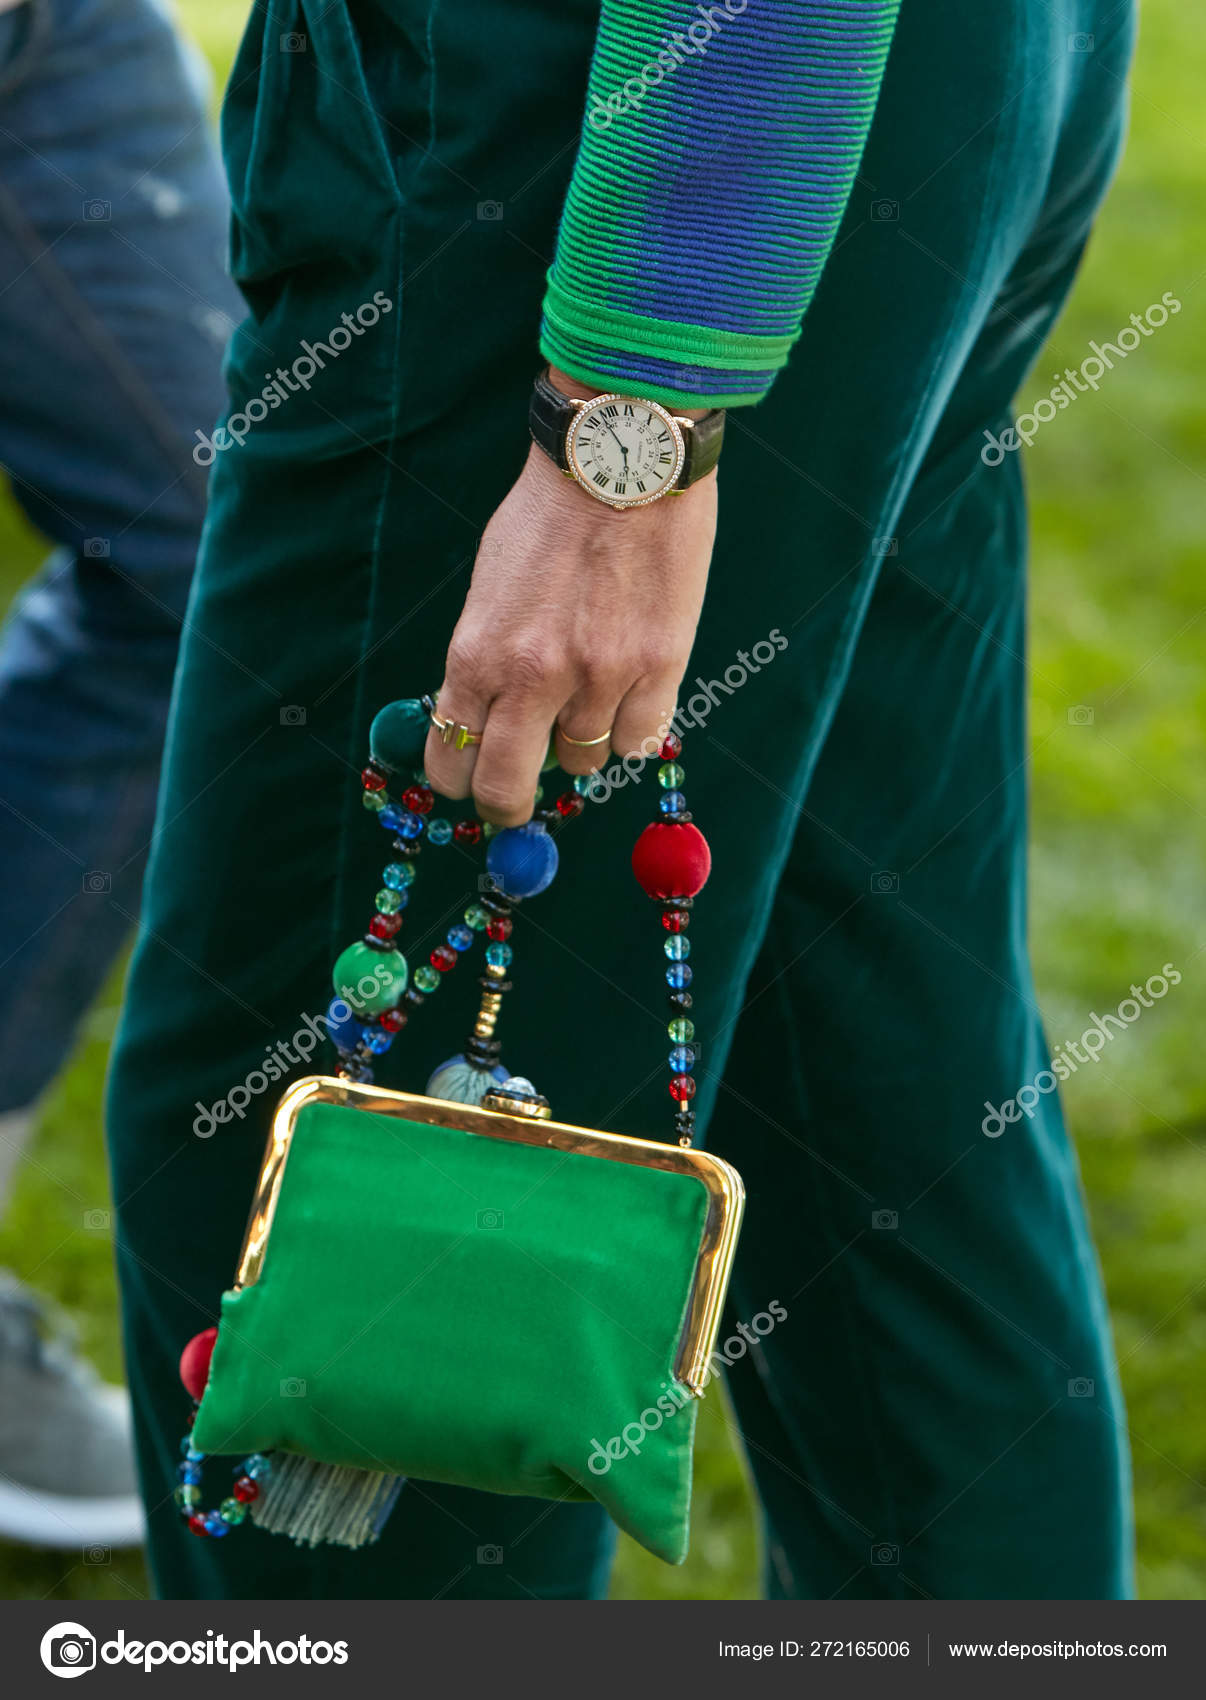 Woman with Ronde de Cartier watch and green velvet trousers and